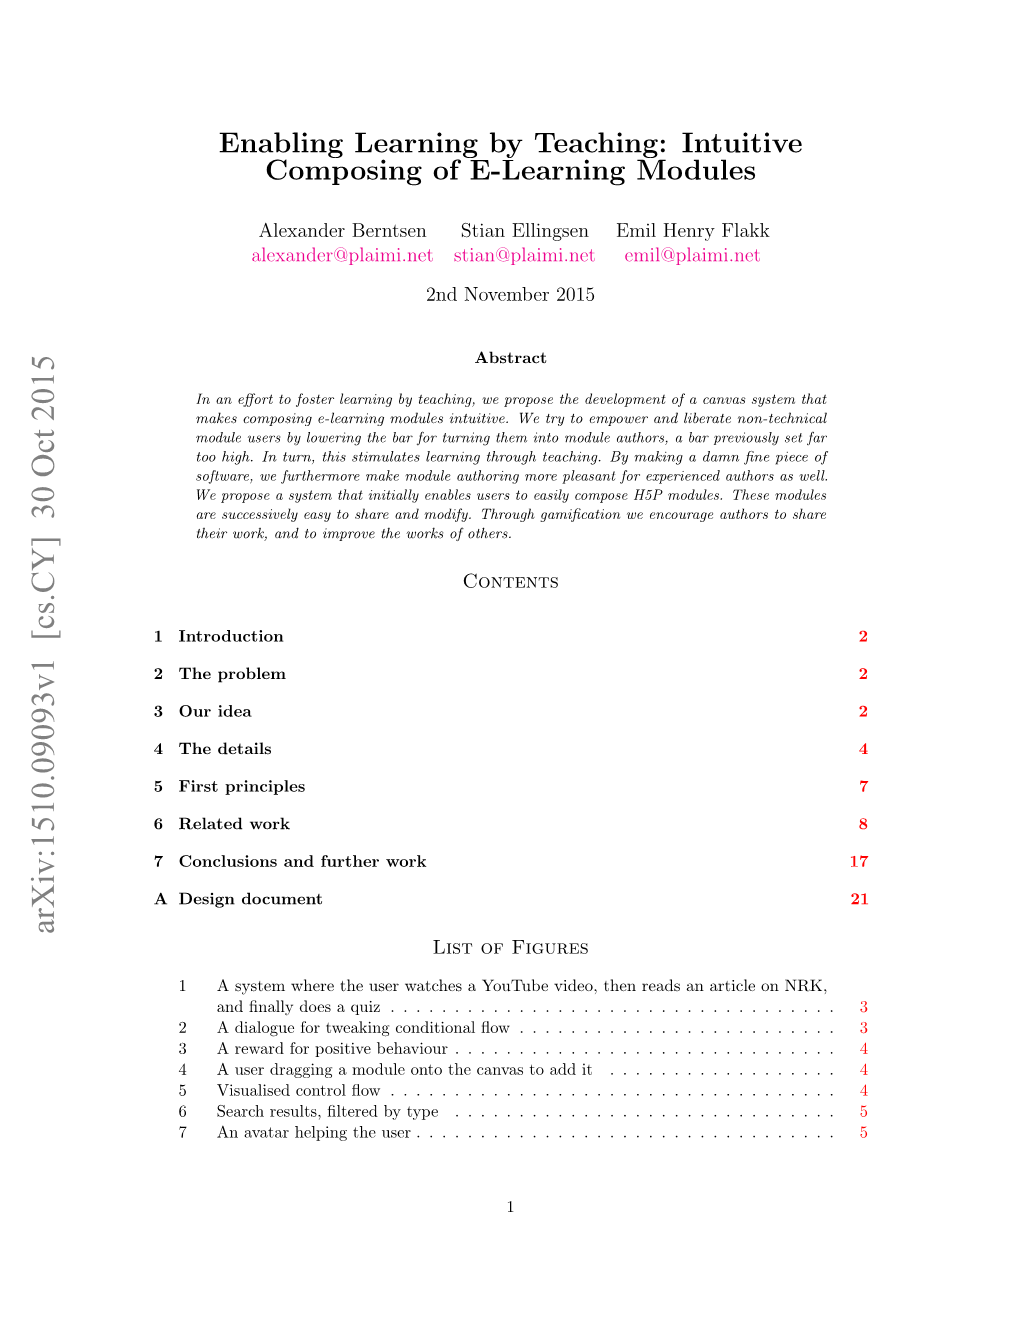 Enabling Learning by Teaching: Intuitive Composing of E-Learning Modules